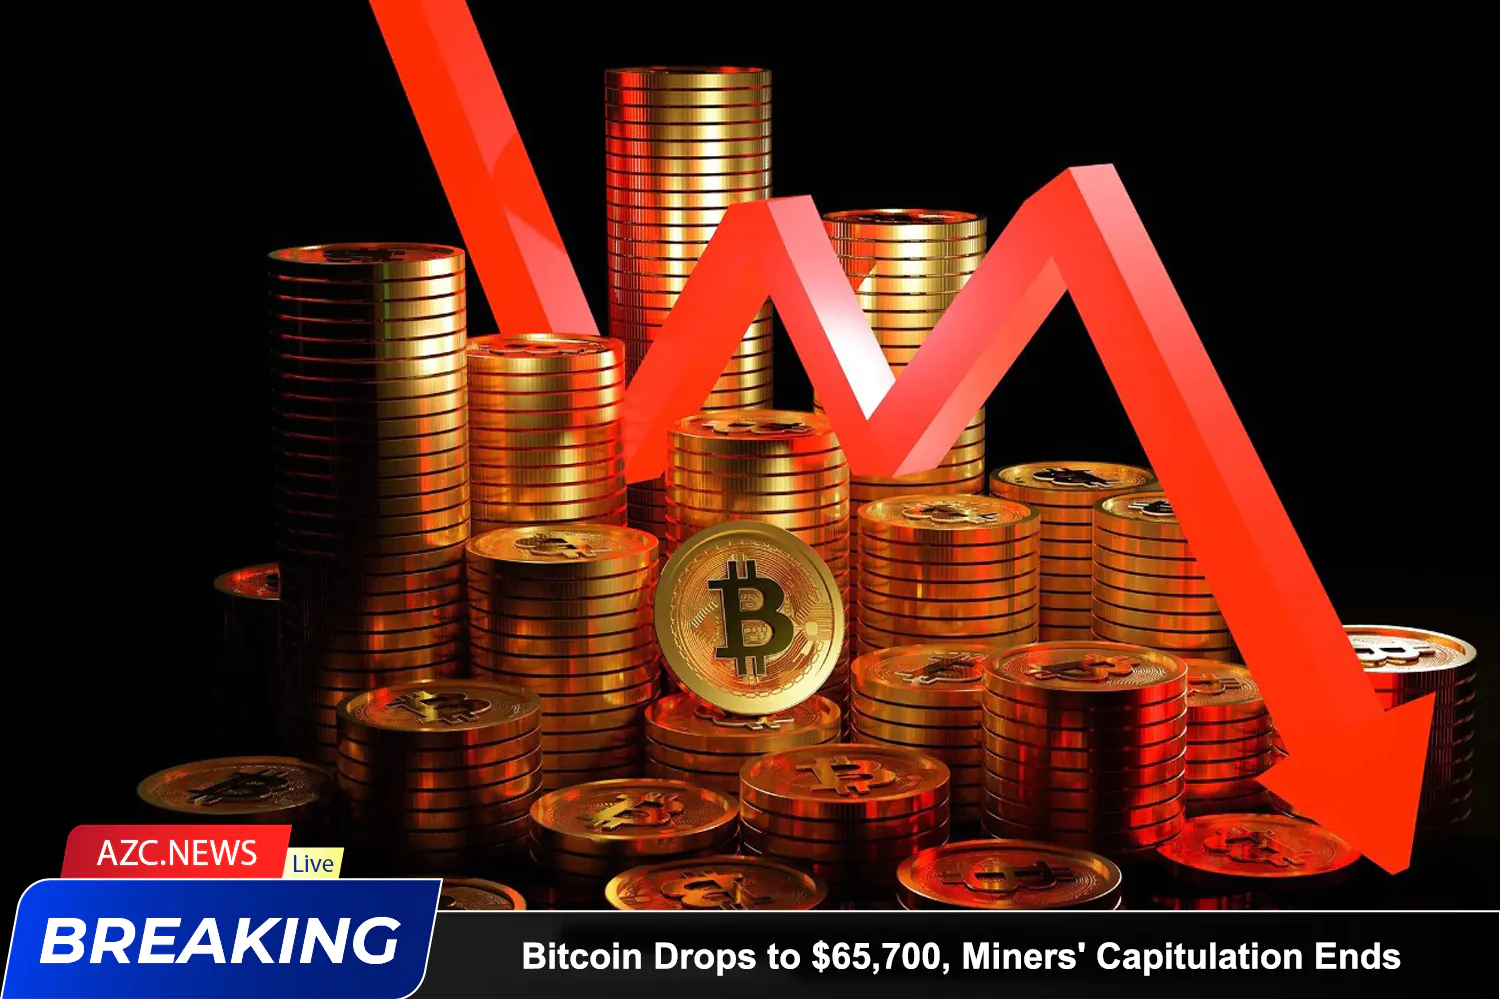 Azcnews Bitcoin Drops To $65,700, Miners' Capitulation Ends